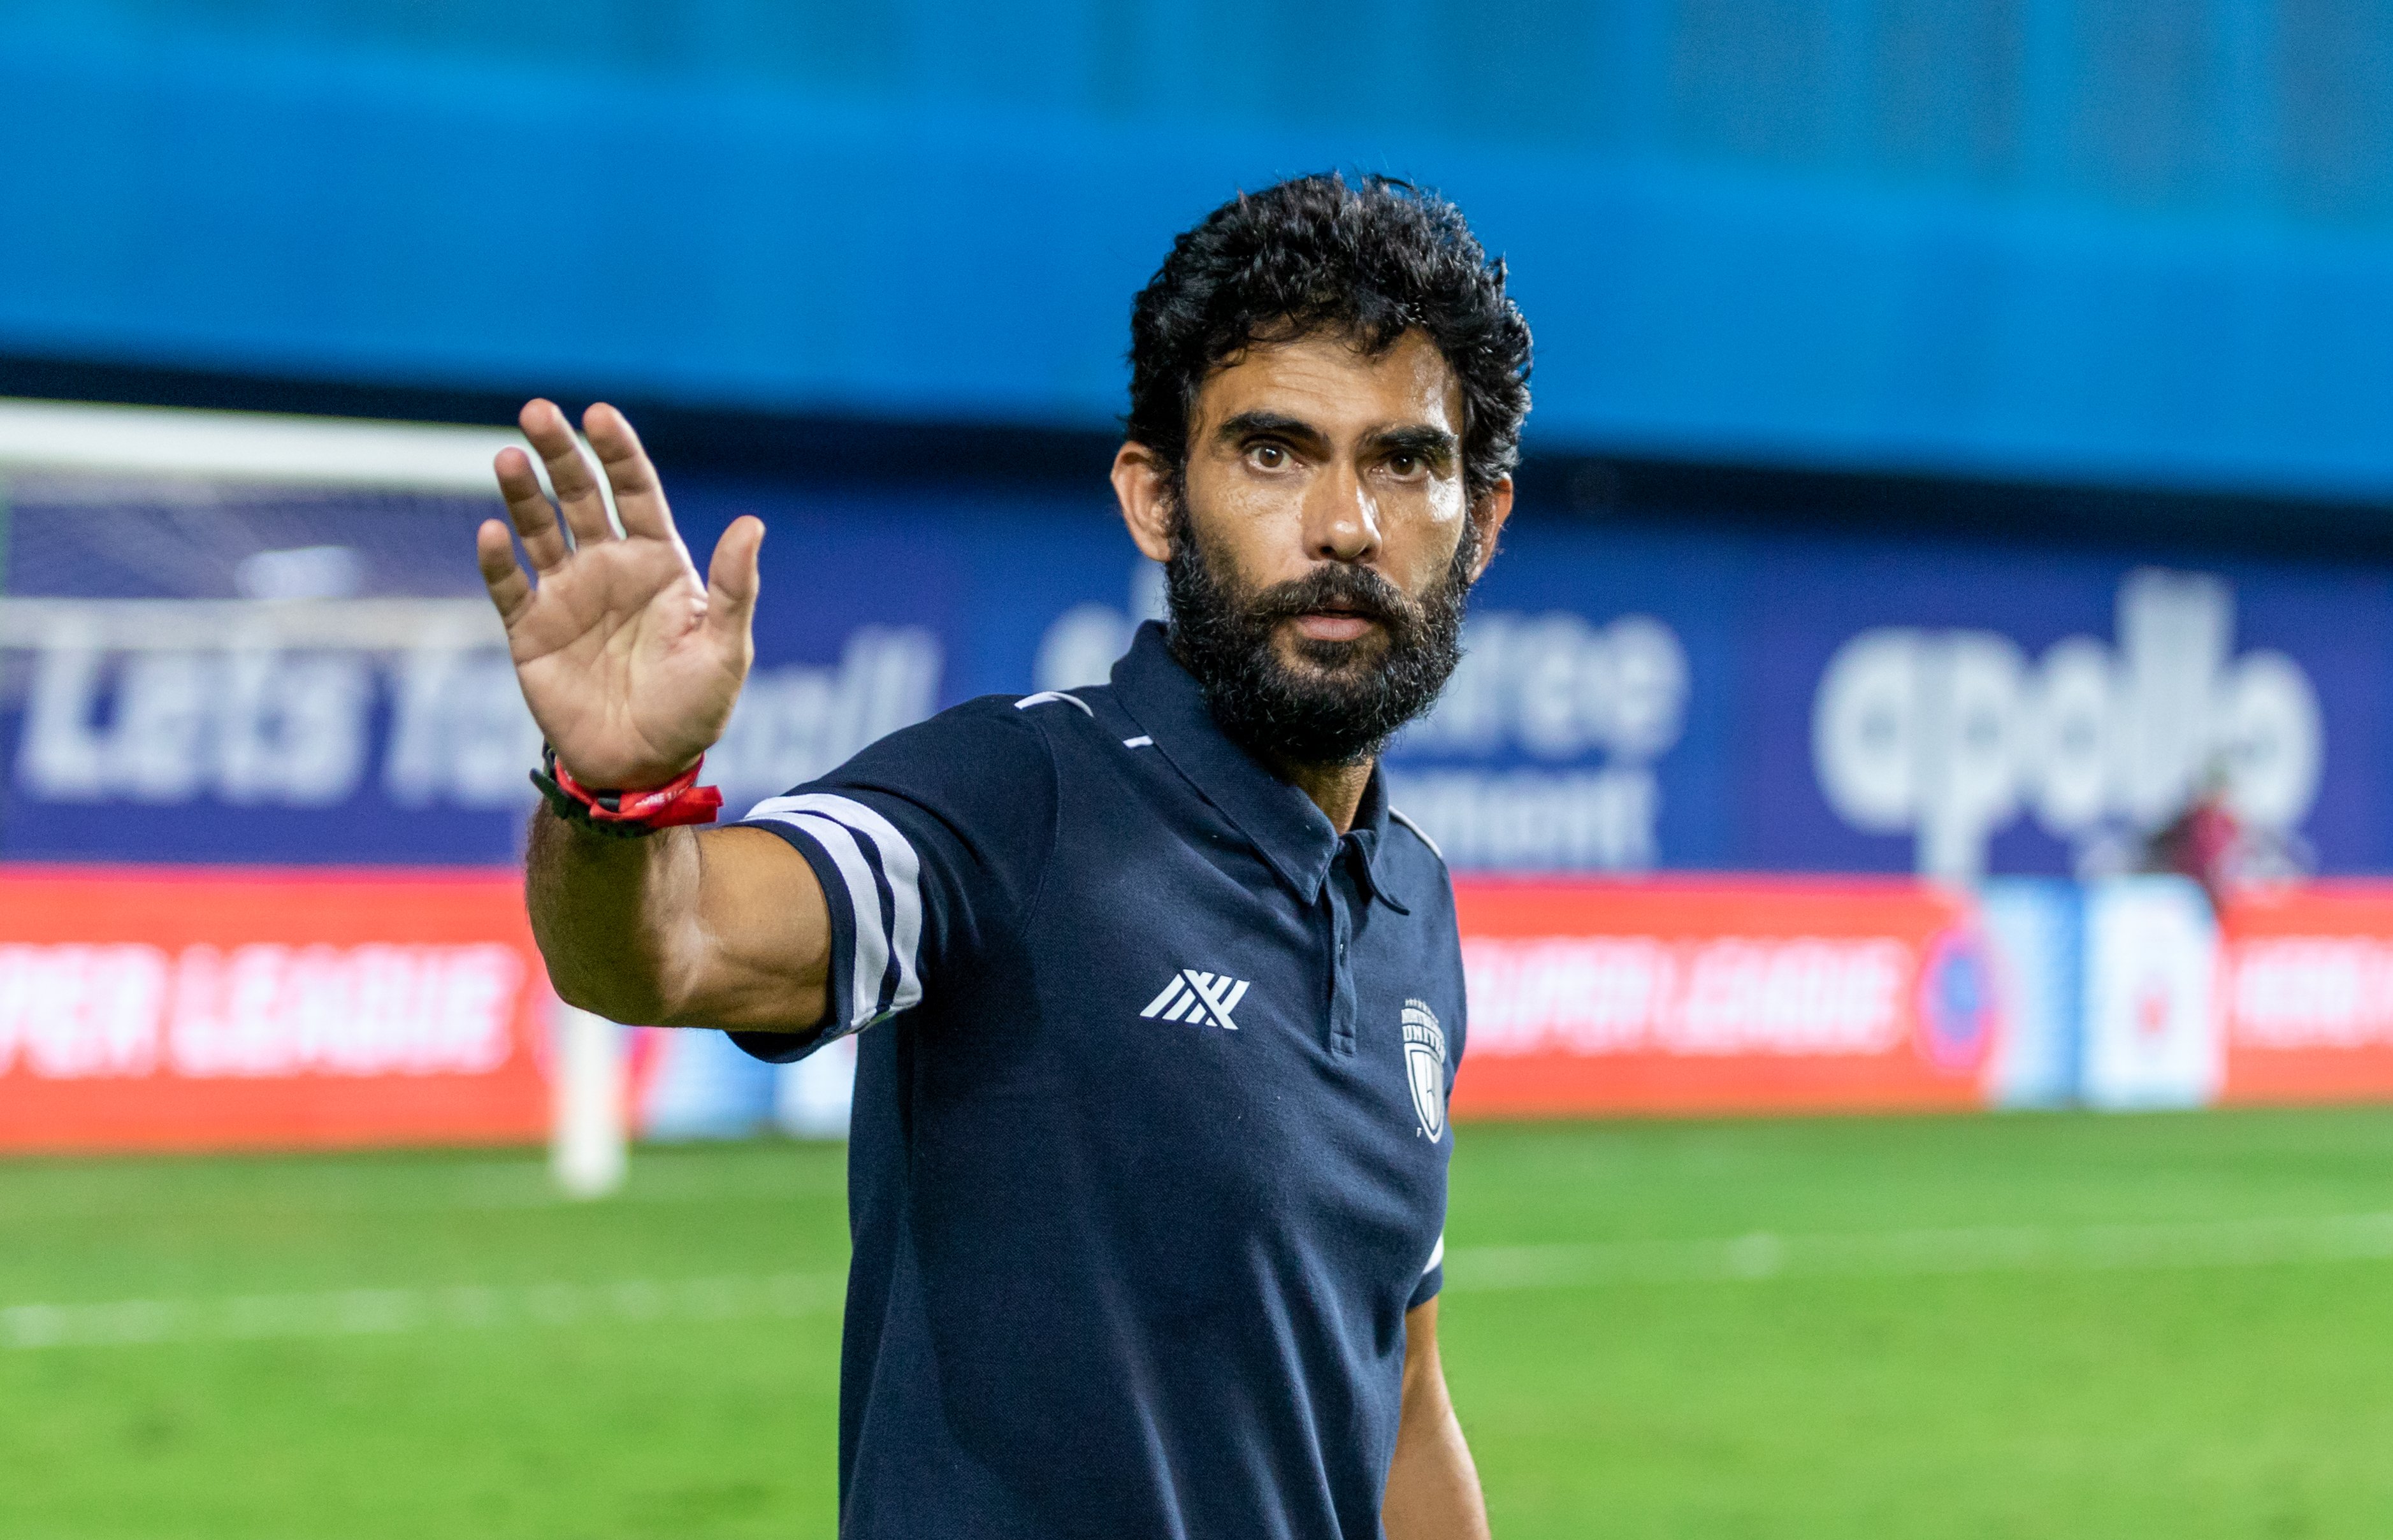 ISL Season 8: We tried our best but it was not up to the mark, says NorthEast United's Khalid Jamil after draw against SC East Bengal